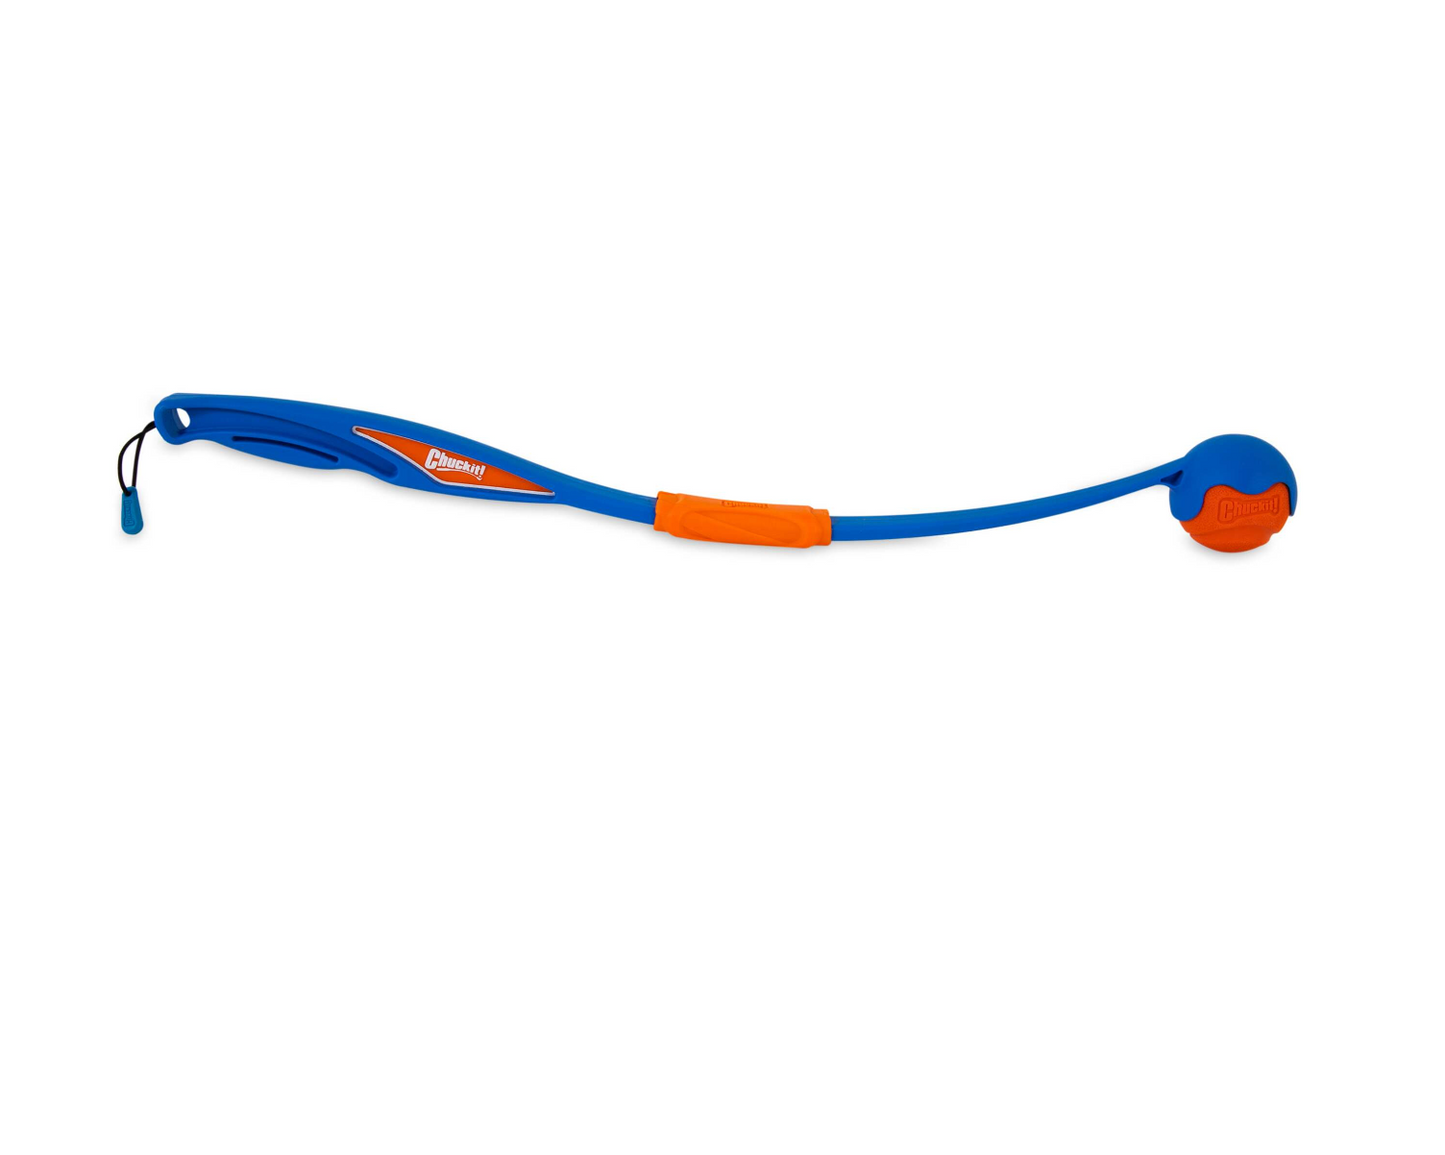 Ball Launcher - Fetch and Fold